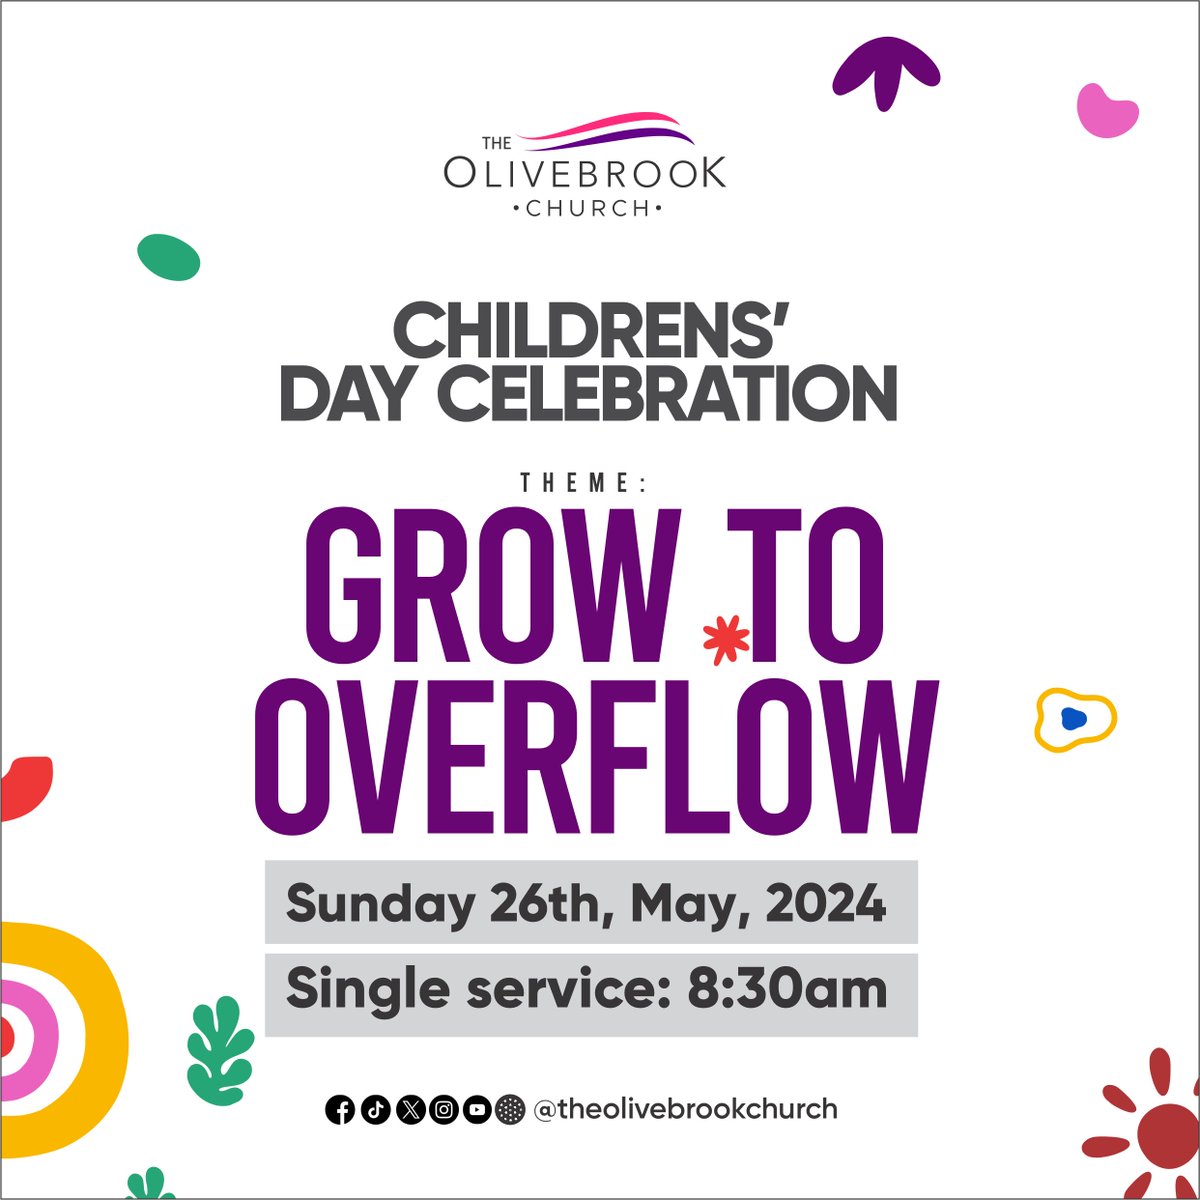 We can't imagine a world without children. Join us this Sunday, 26th may 2024 as we celebrate our younger ones. Grow to overflow. #Theolivebrookchurch #Childernday #growtooverflow #welovechildren #childrenaroundtheworld #littleone